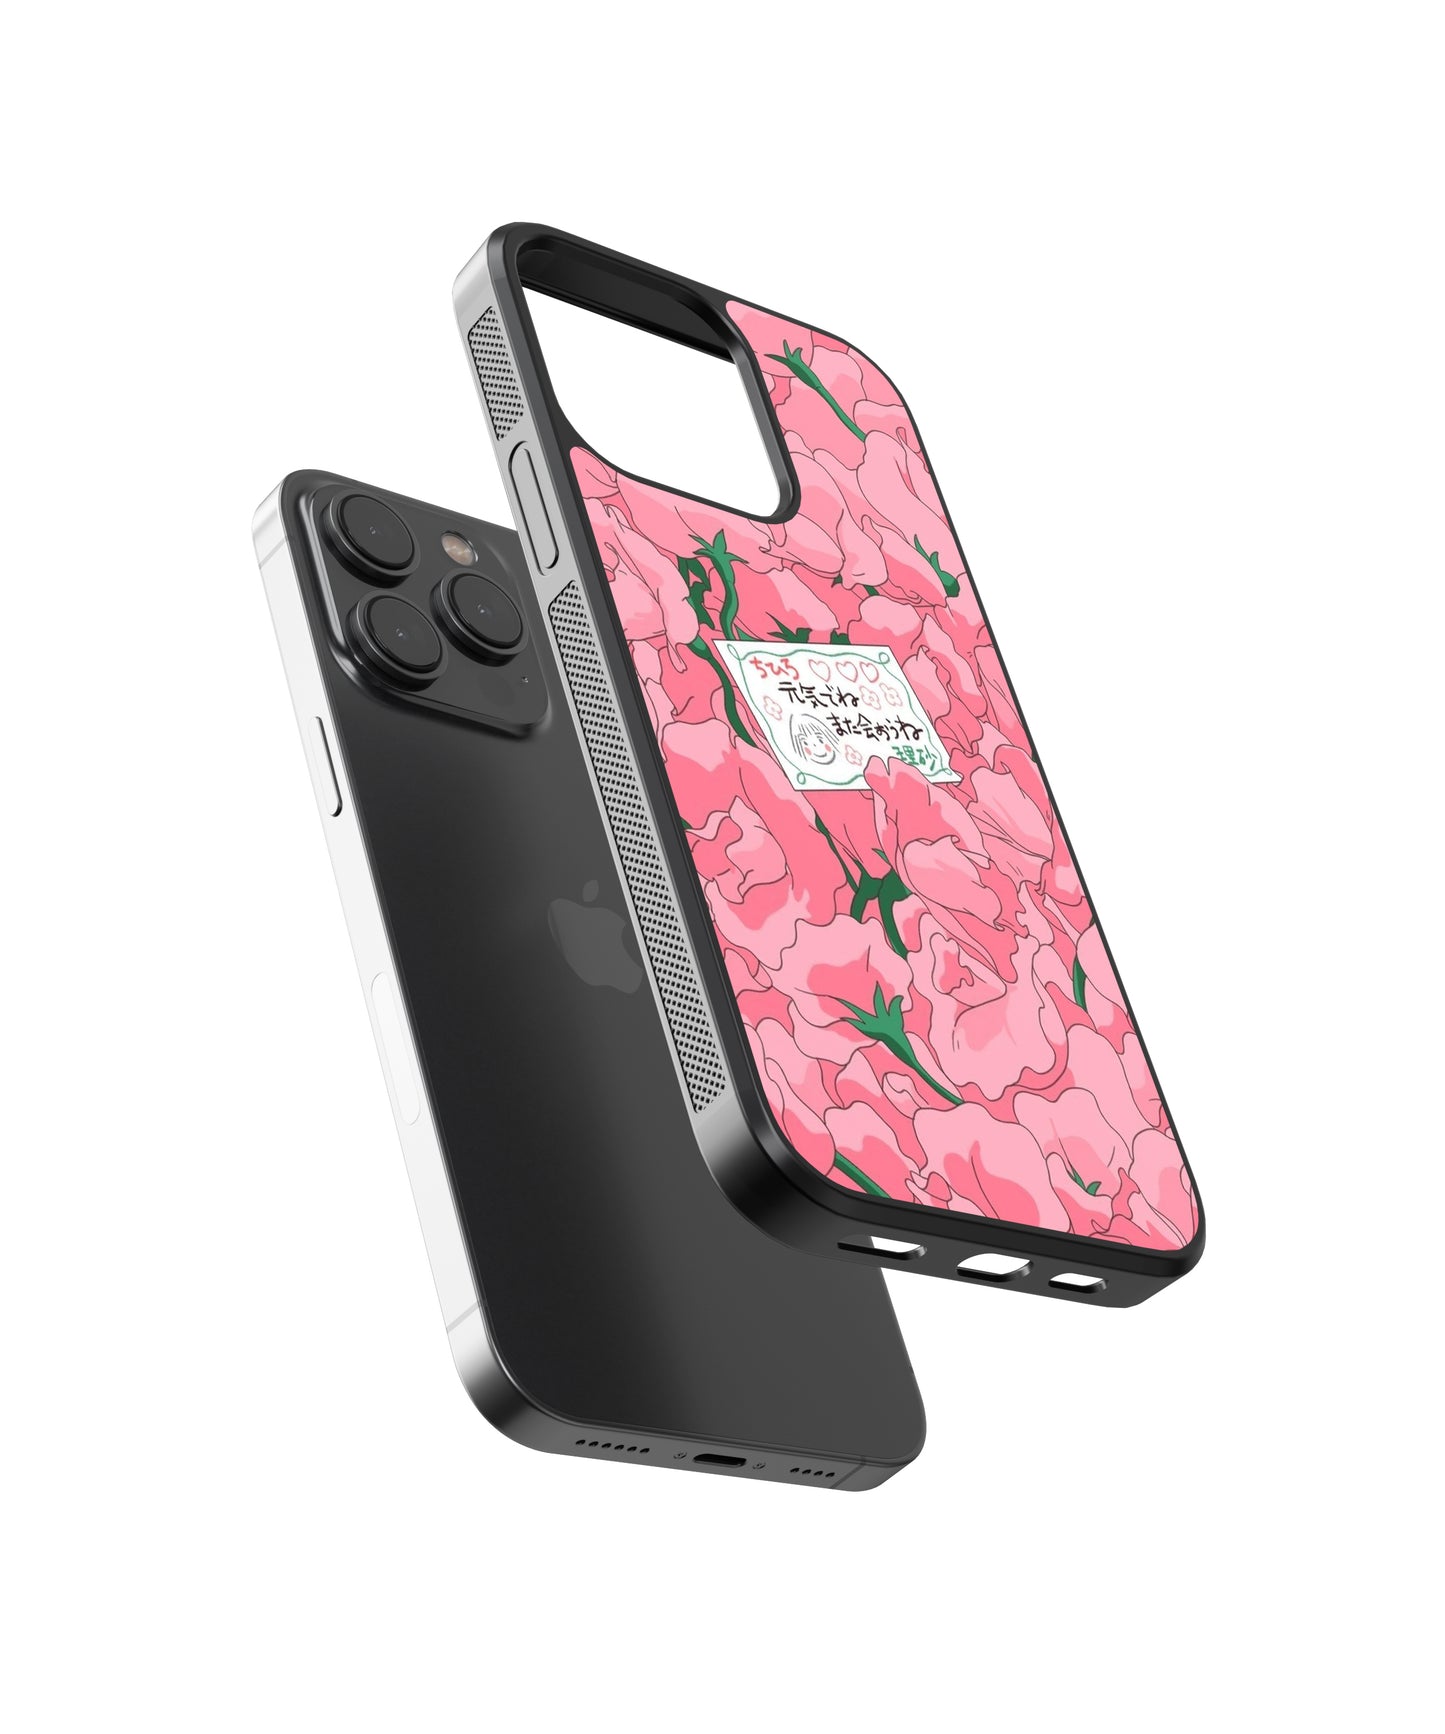 Japanese Floral Abstract Phone Glass Case Cover - Aesthetic Phone Cases - Culltique